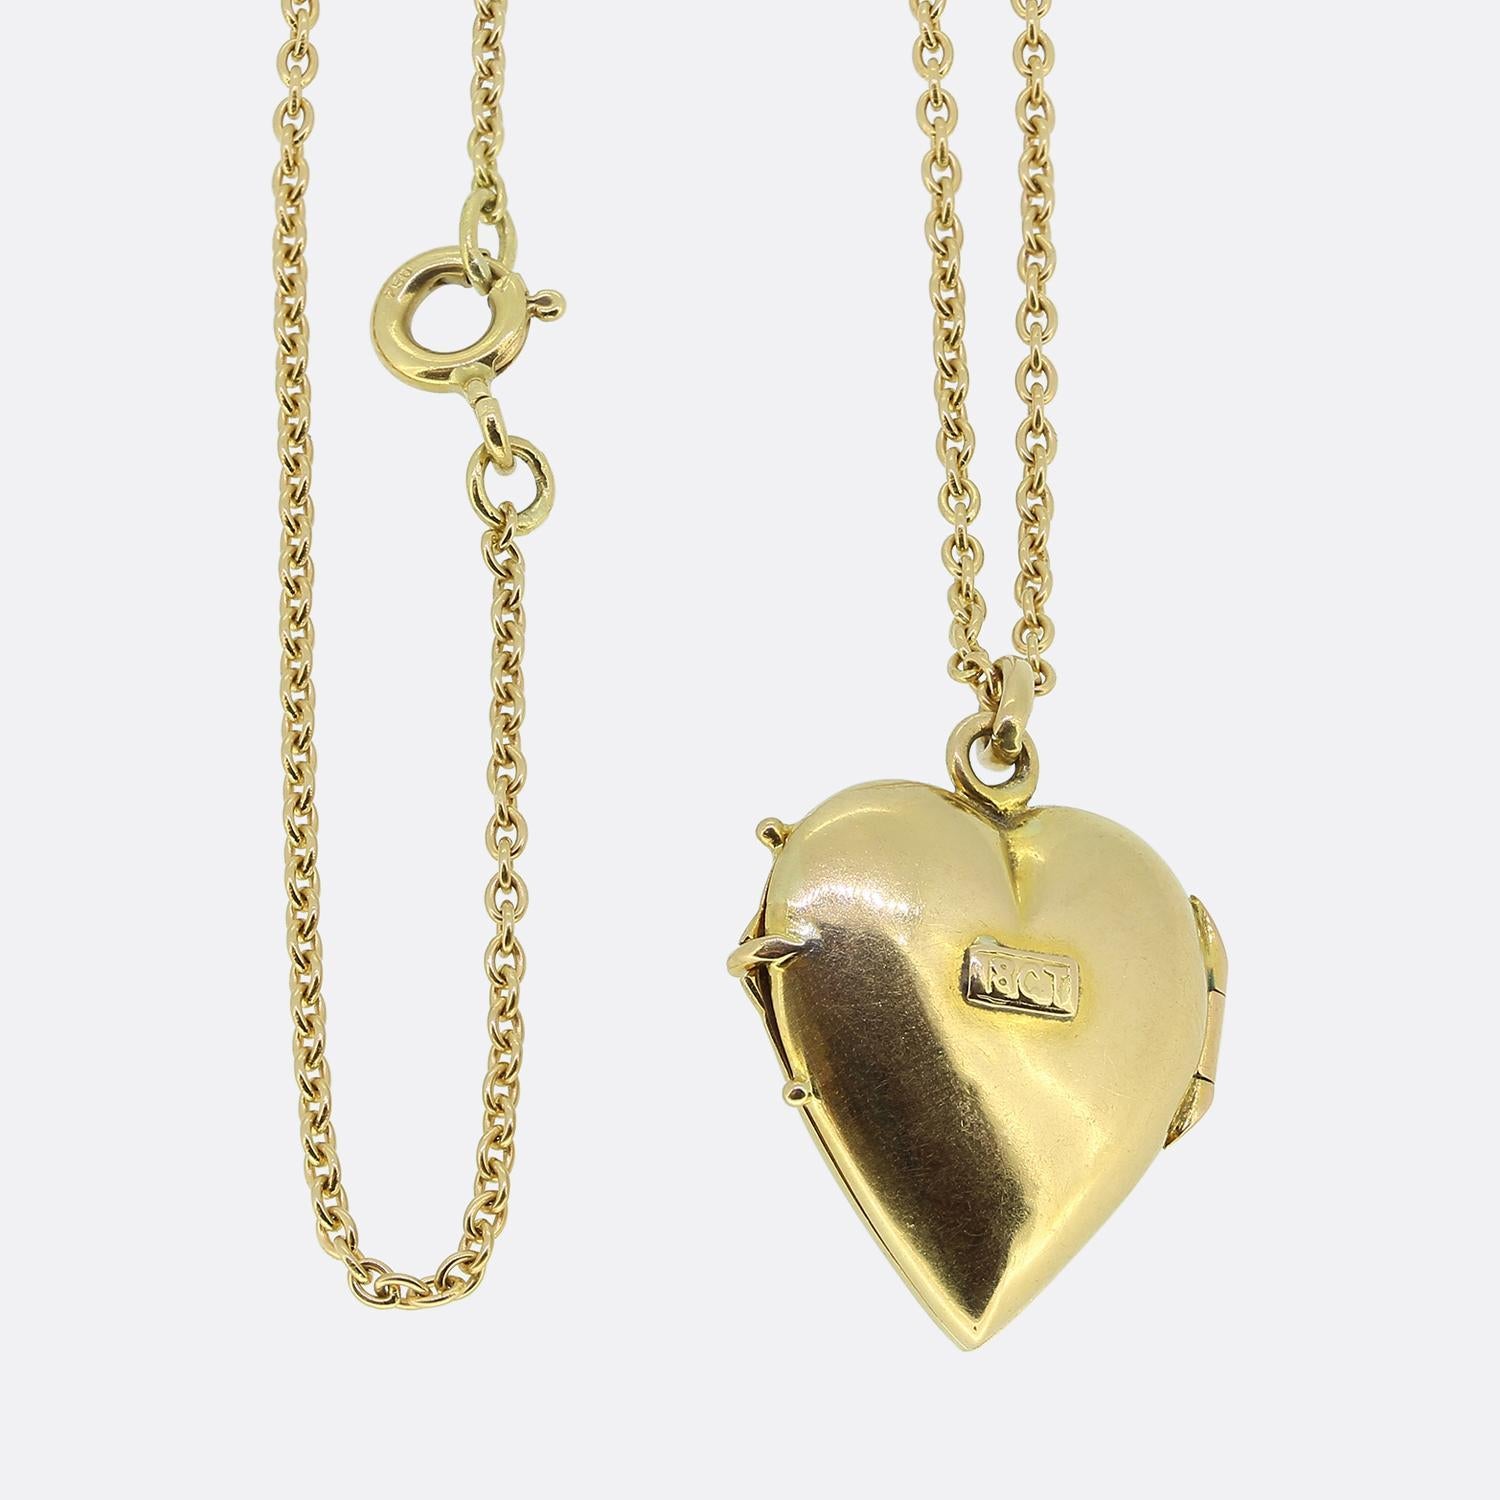 Here we have a romantic ruby and pearl set locket necklace. This antique pendant has been crafted from 18ct yellow gold into the the shape of a little love heart and expertly set with an array of round rubies and natural pearls in a floral